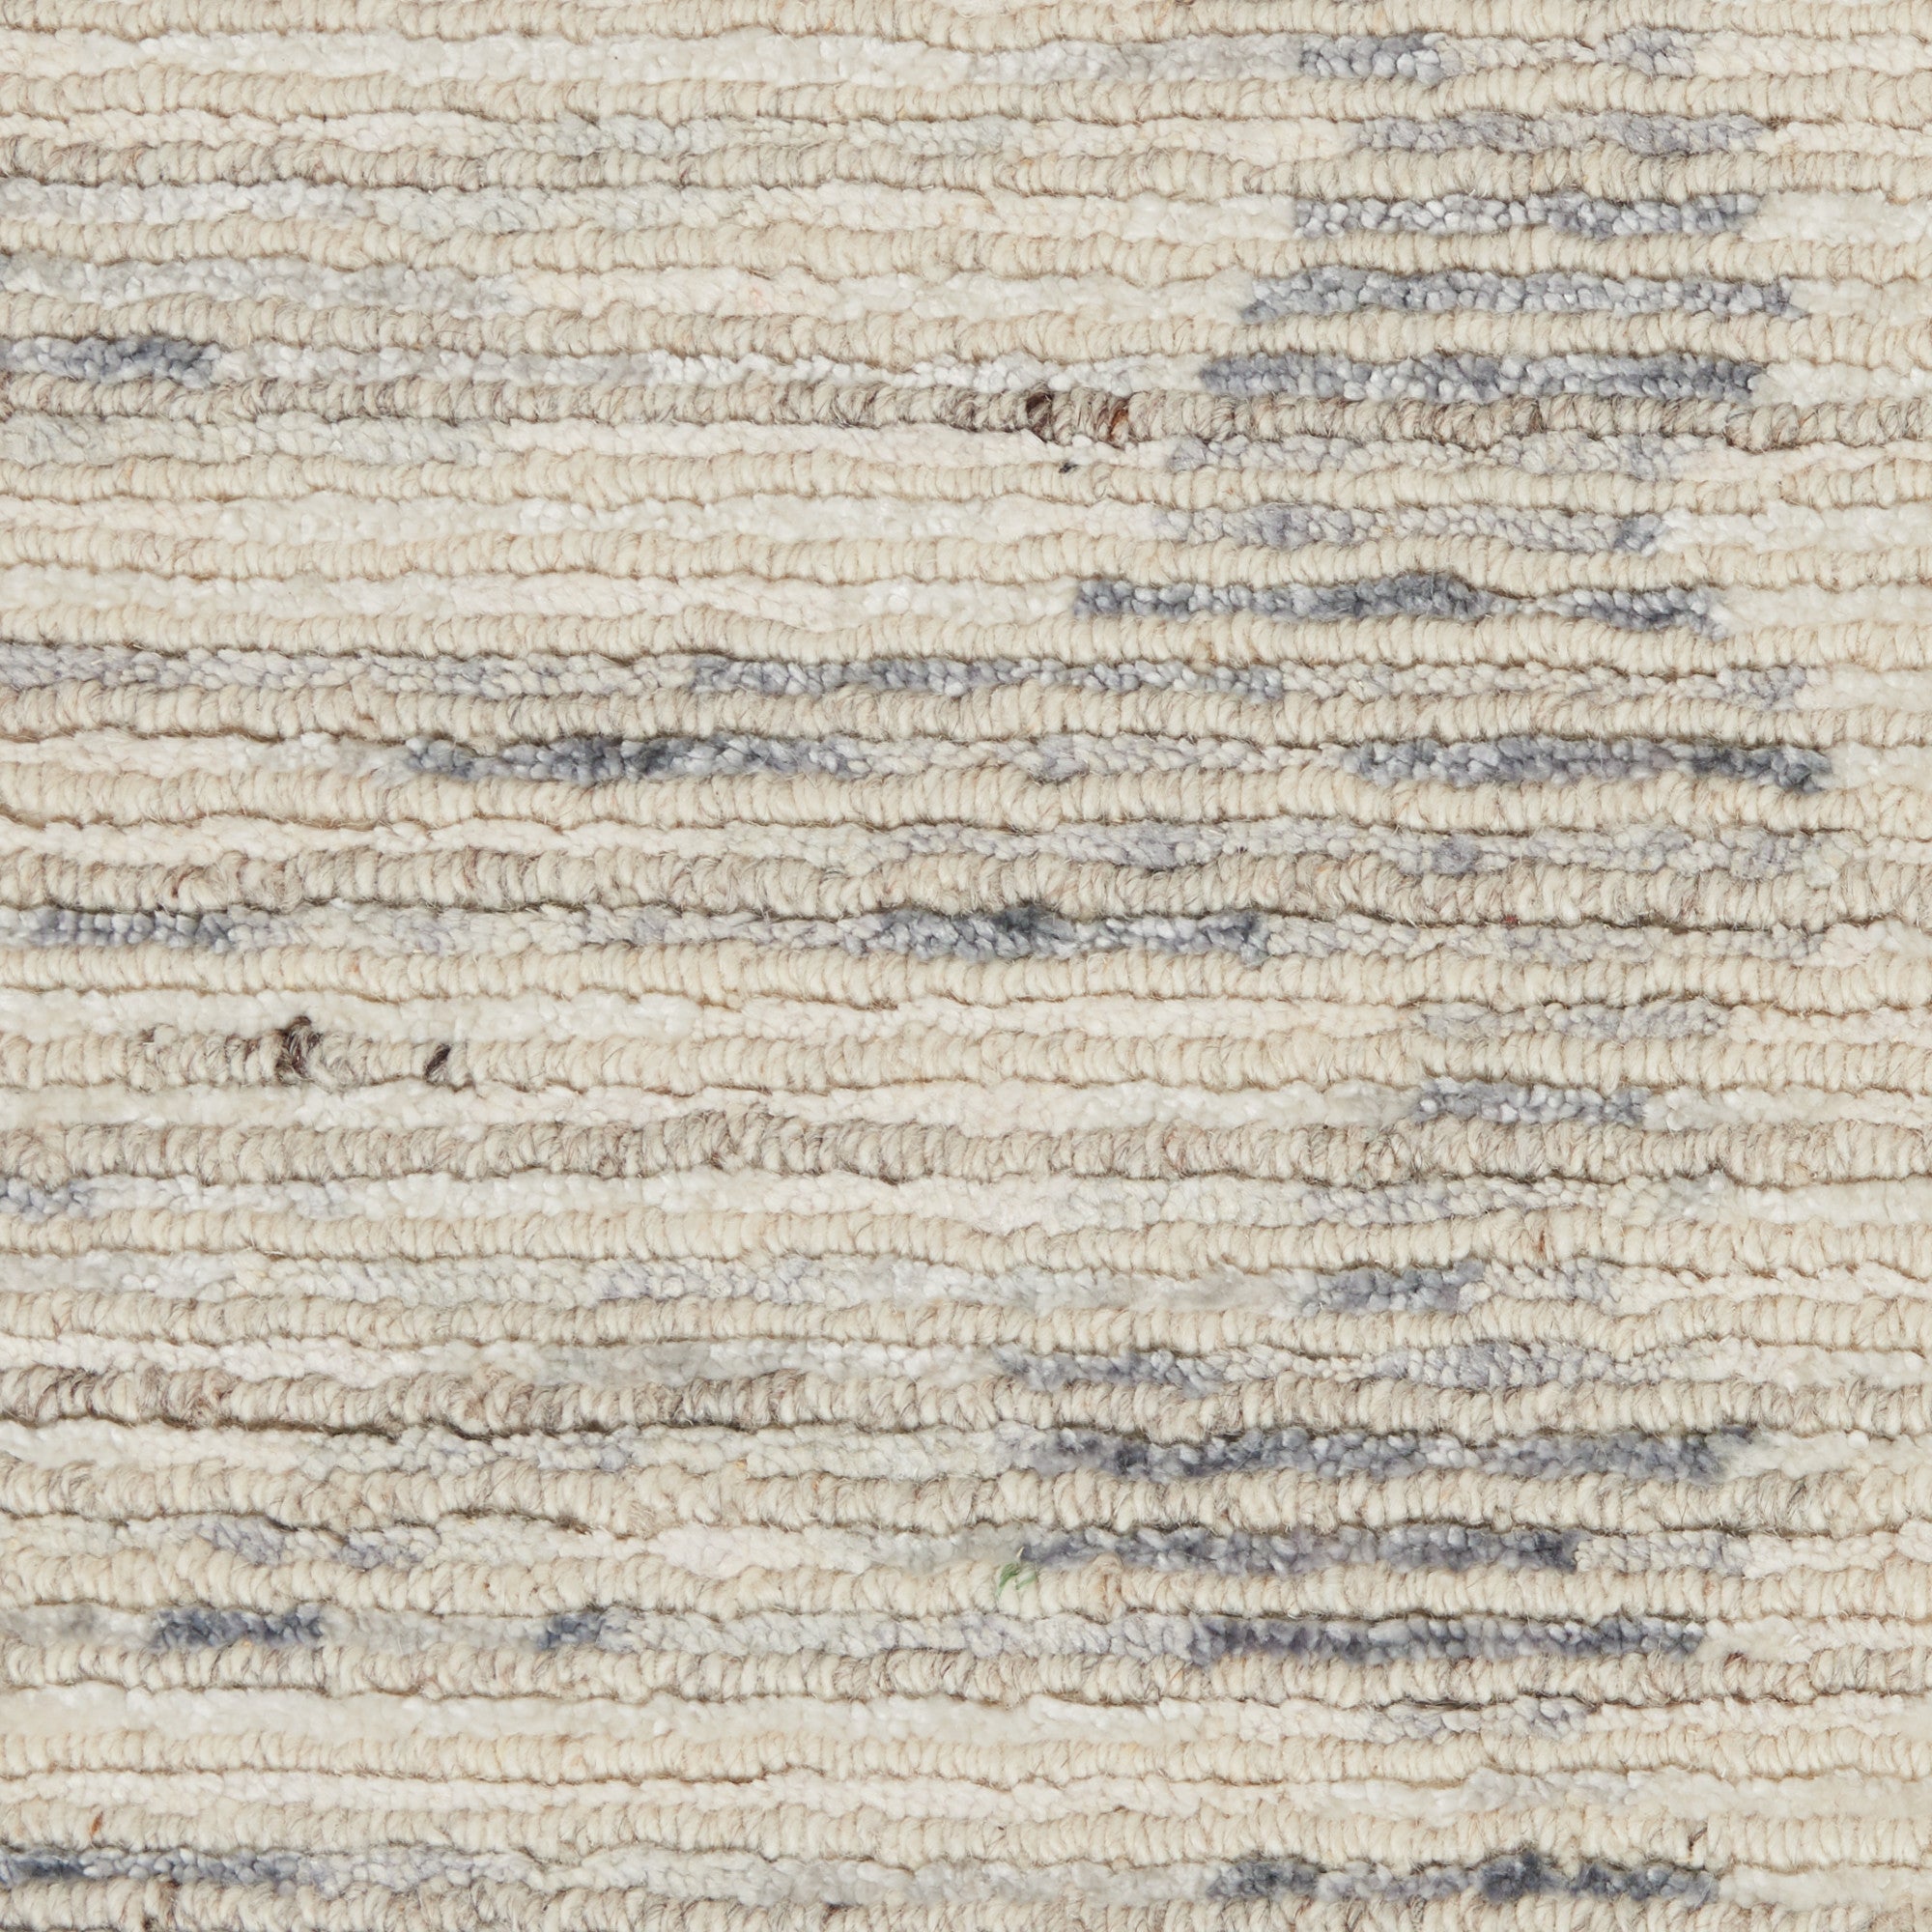 Close-up of textured, undyed fabric with horizontal blue stripes.